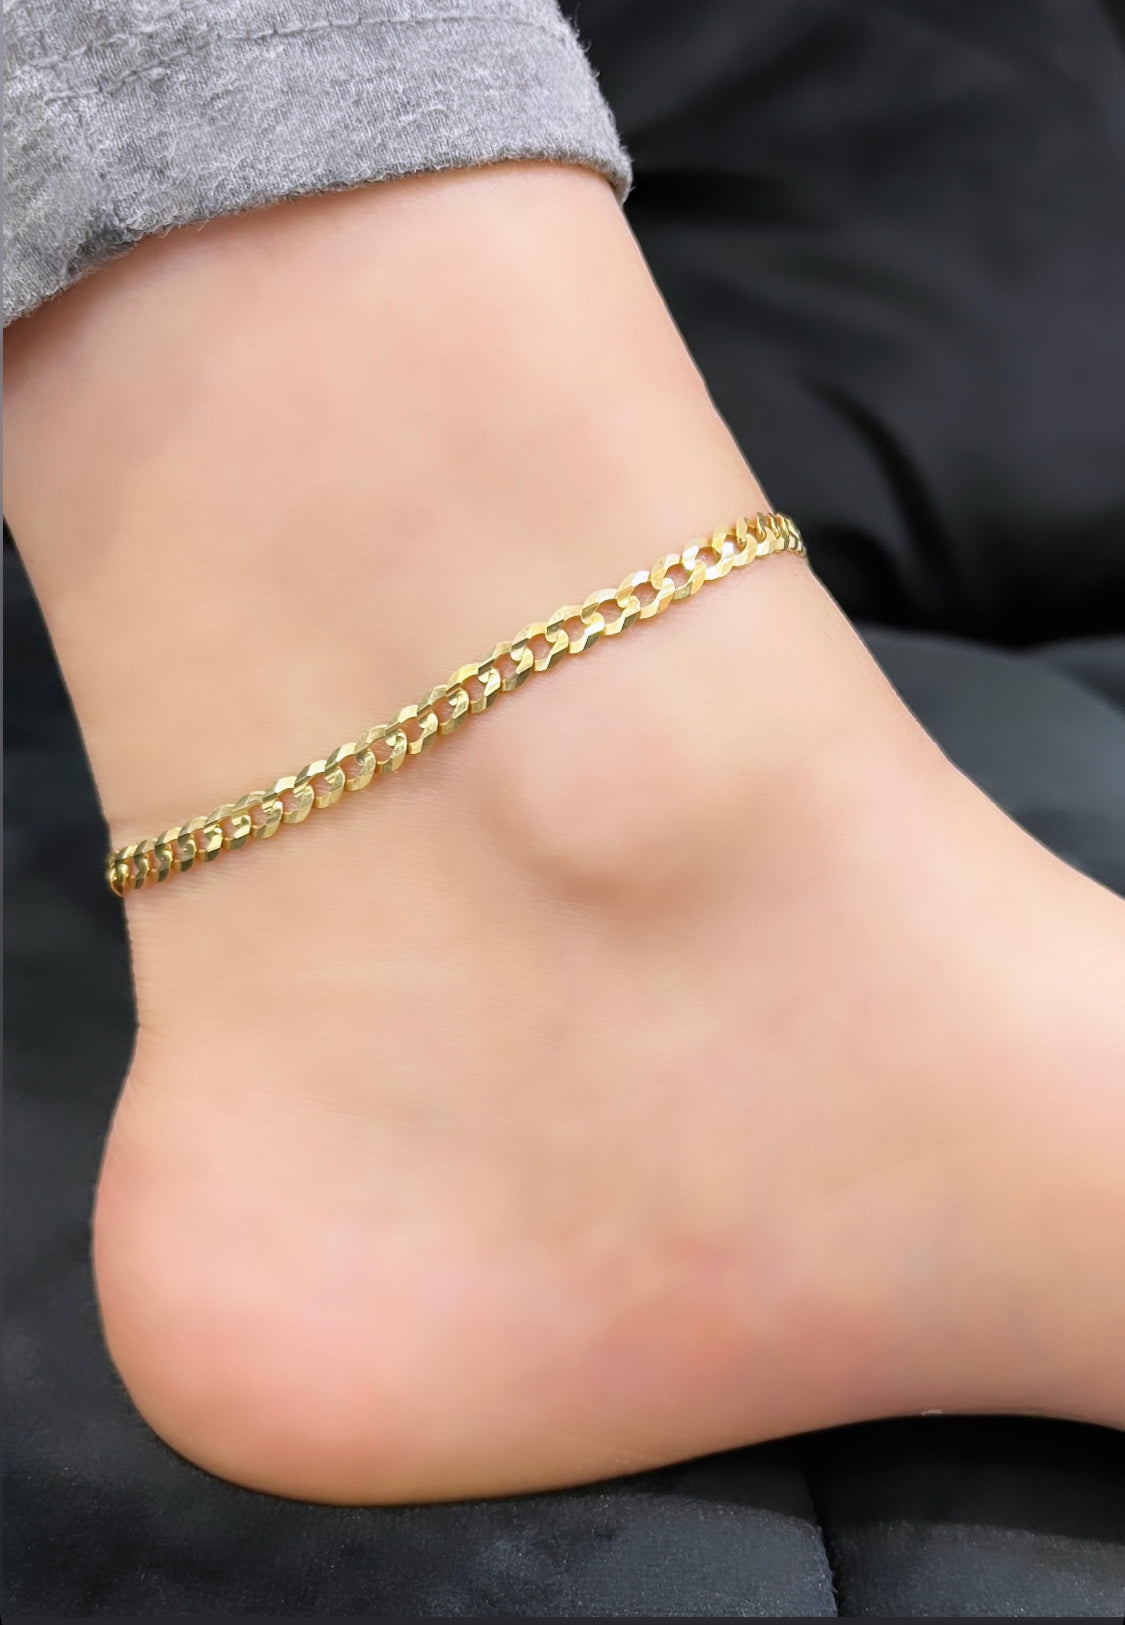 Gold Ankle Bracelet, Anklets for Women, Gold Chain Anklet, Gold Bridesmaid  Jewelry, Cute Anklet Available in Plus Size - Etsy